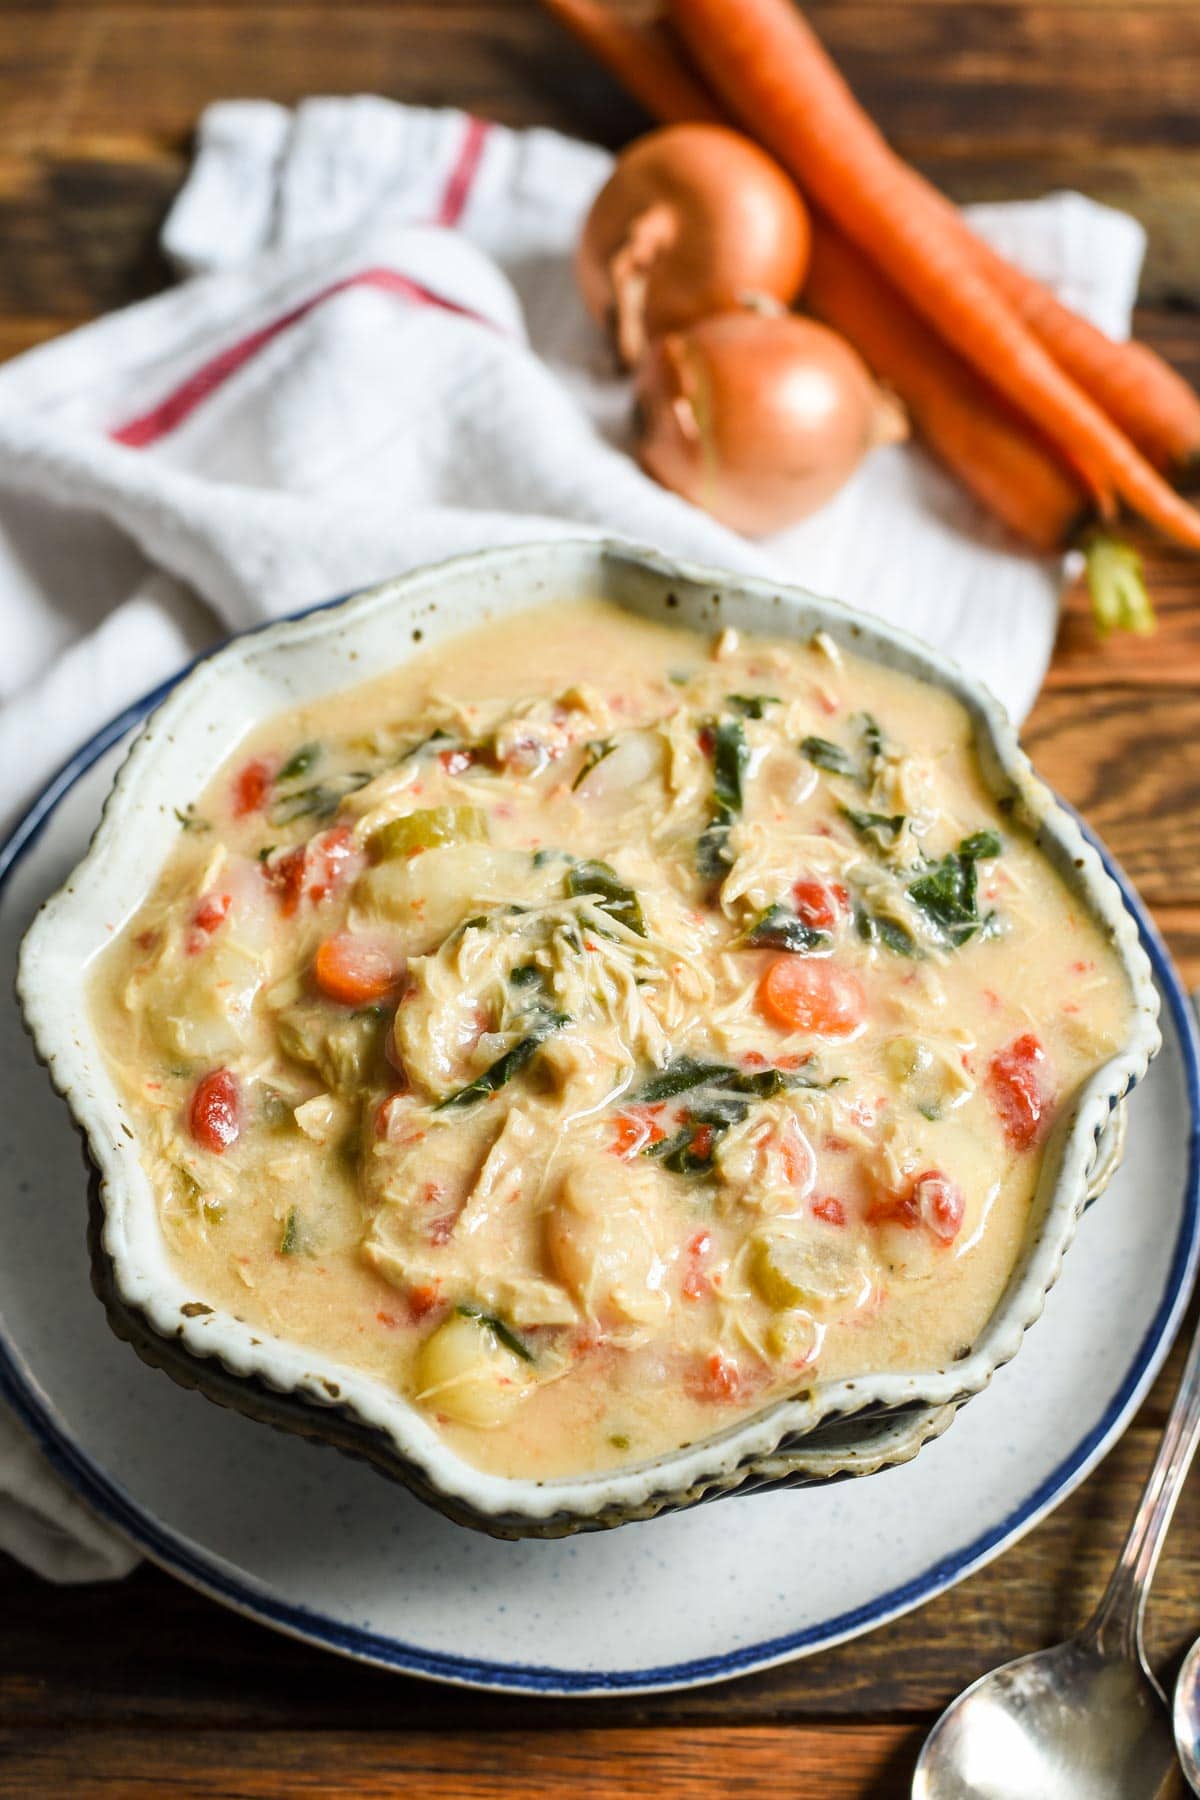 This creamy Crock Pot Chicken Gnocchi Soup has everything you need for a healthy weeknight meal all made in a slow cooker!@